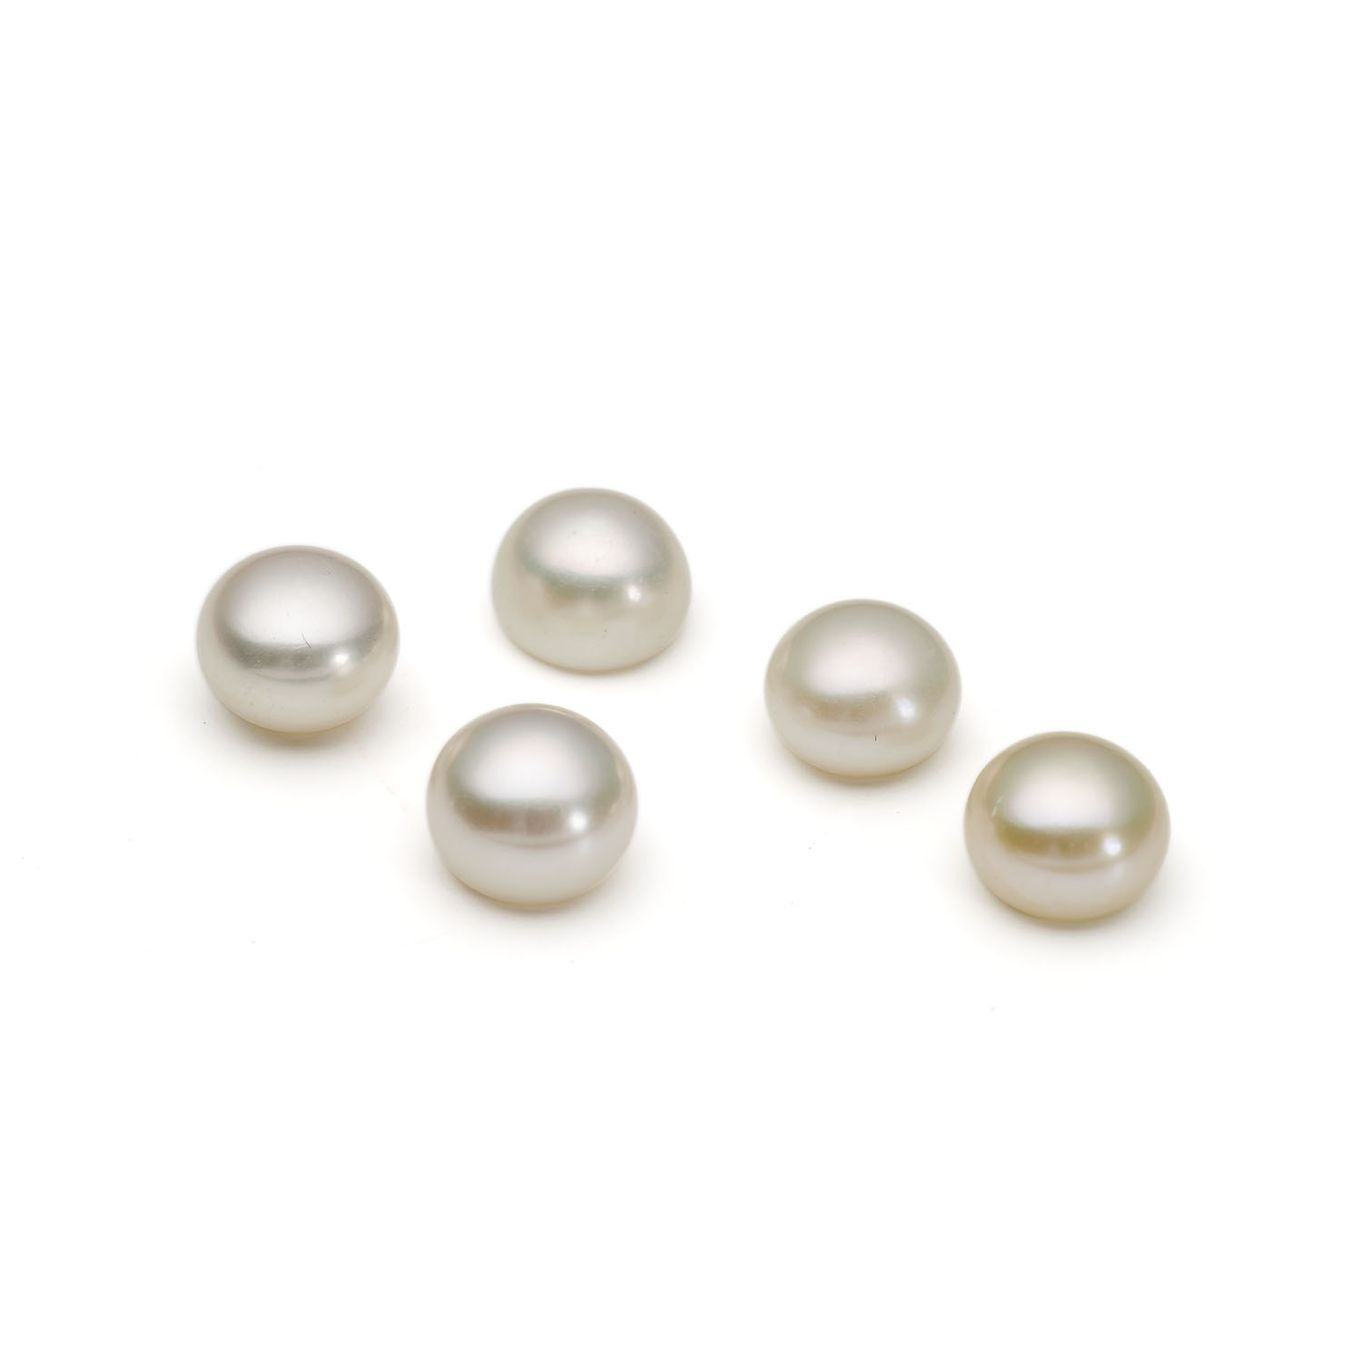 White Cultured Freshwater Pearls Half-Drilled Button 4-4.5mm